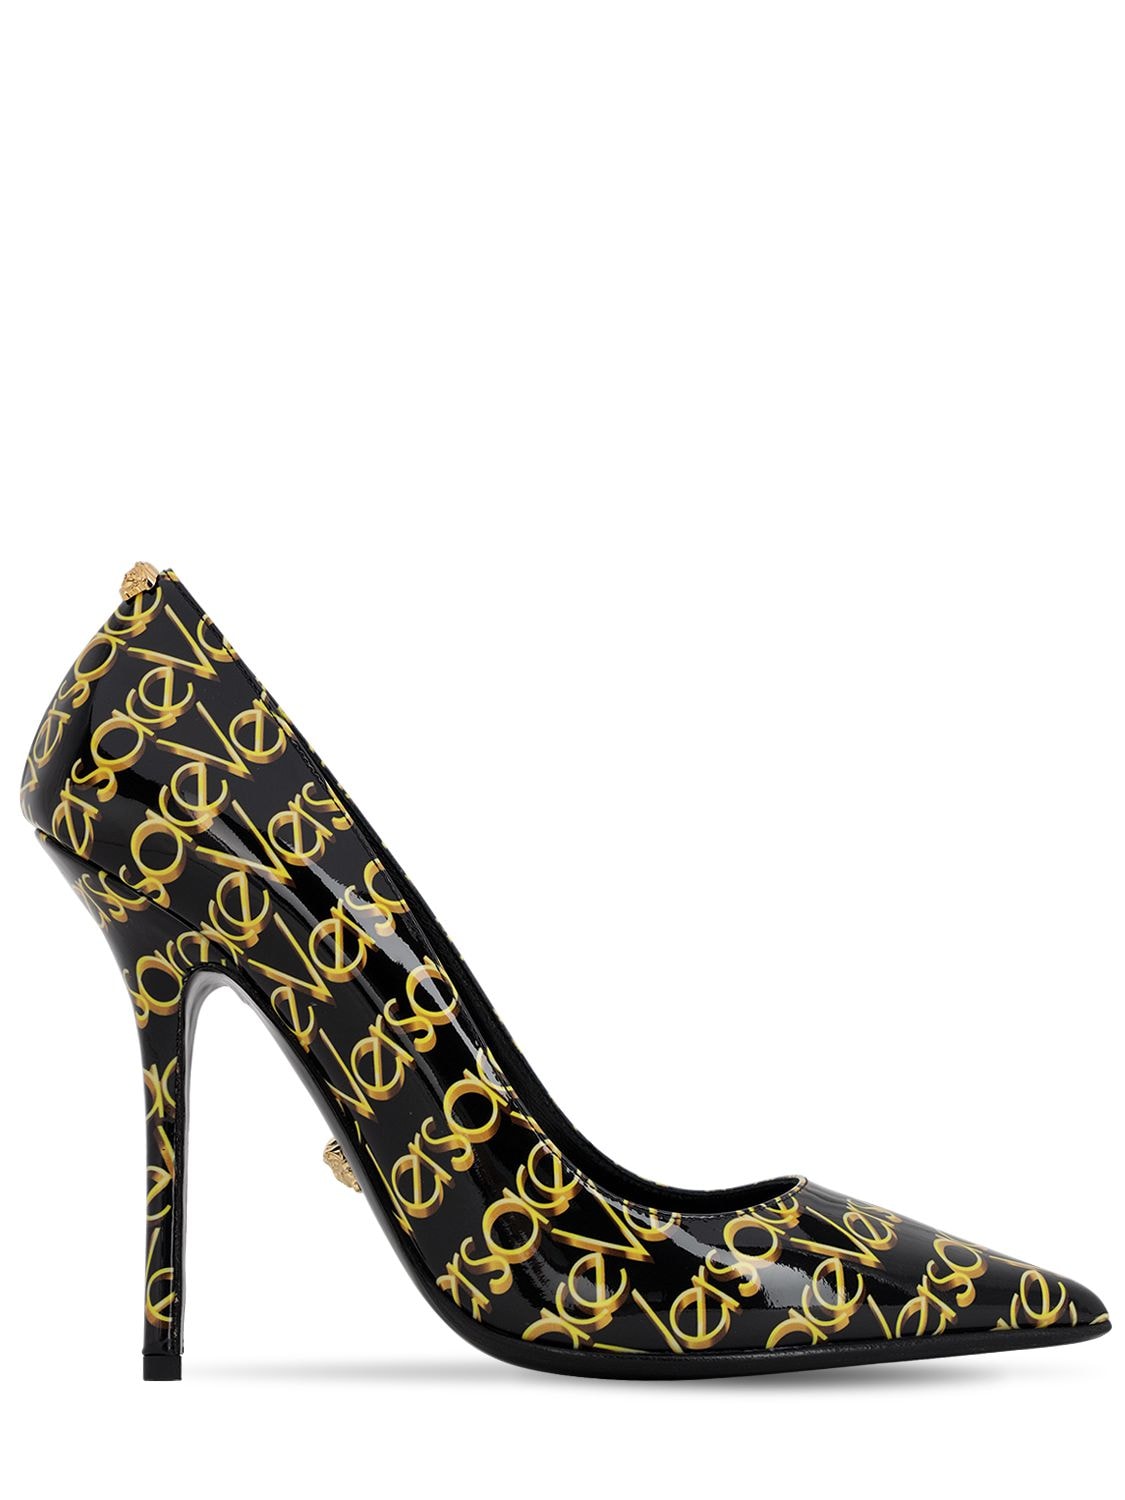 VERSACE 110MM LOGO PATENT LEATHER PUMPS,70IWTY007-RDRET0G1